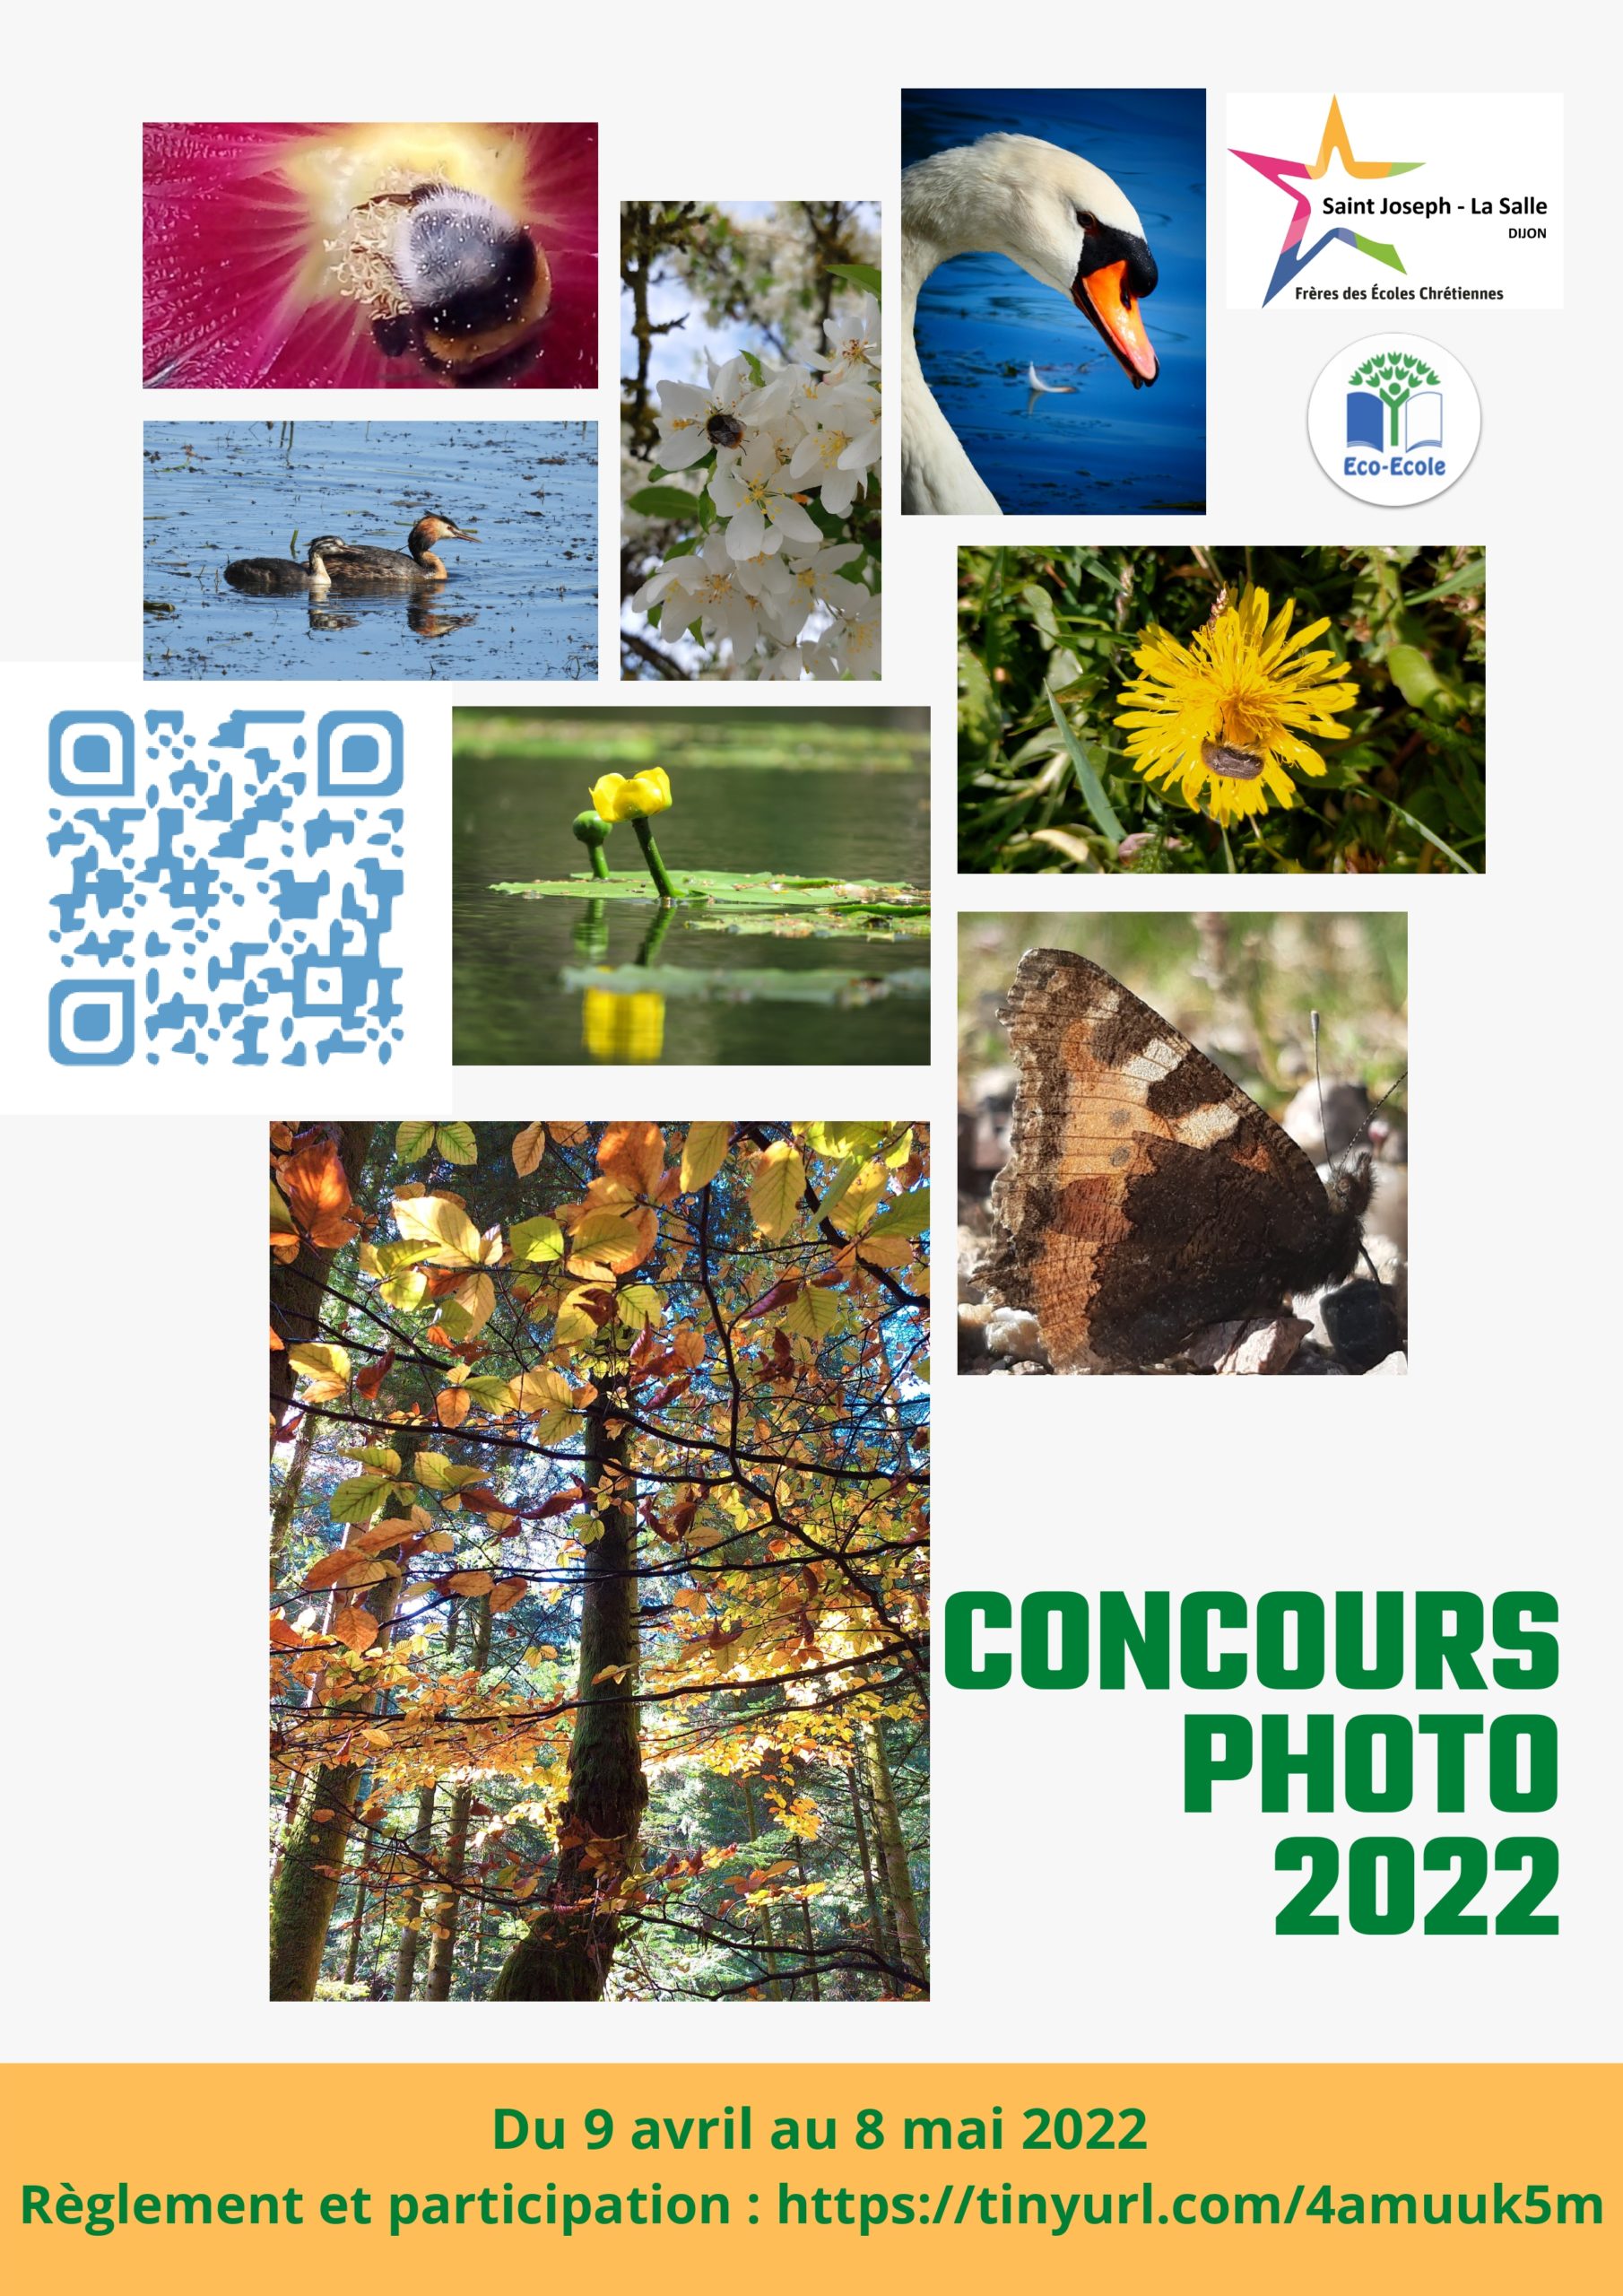 You are currently viewing Concours photo 2022 du 9 avril au 8 mai